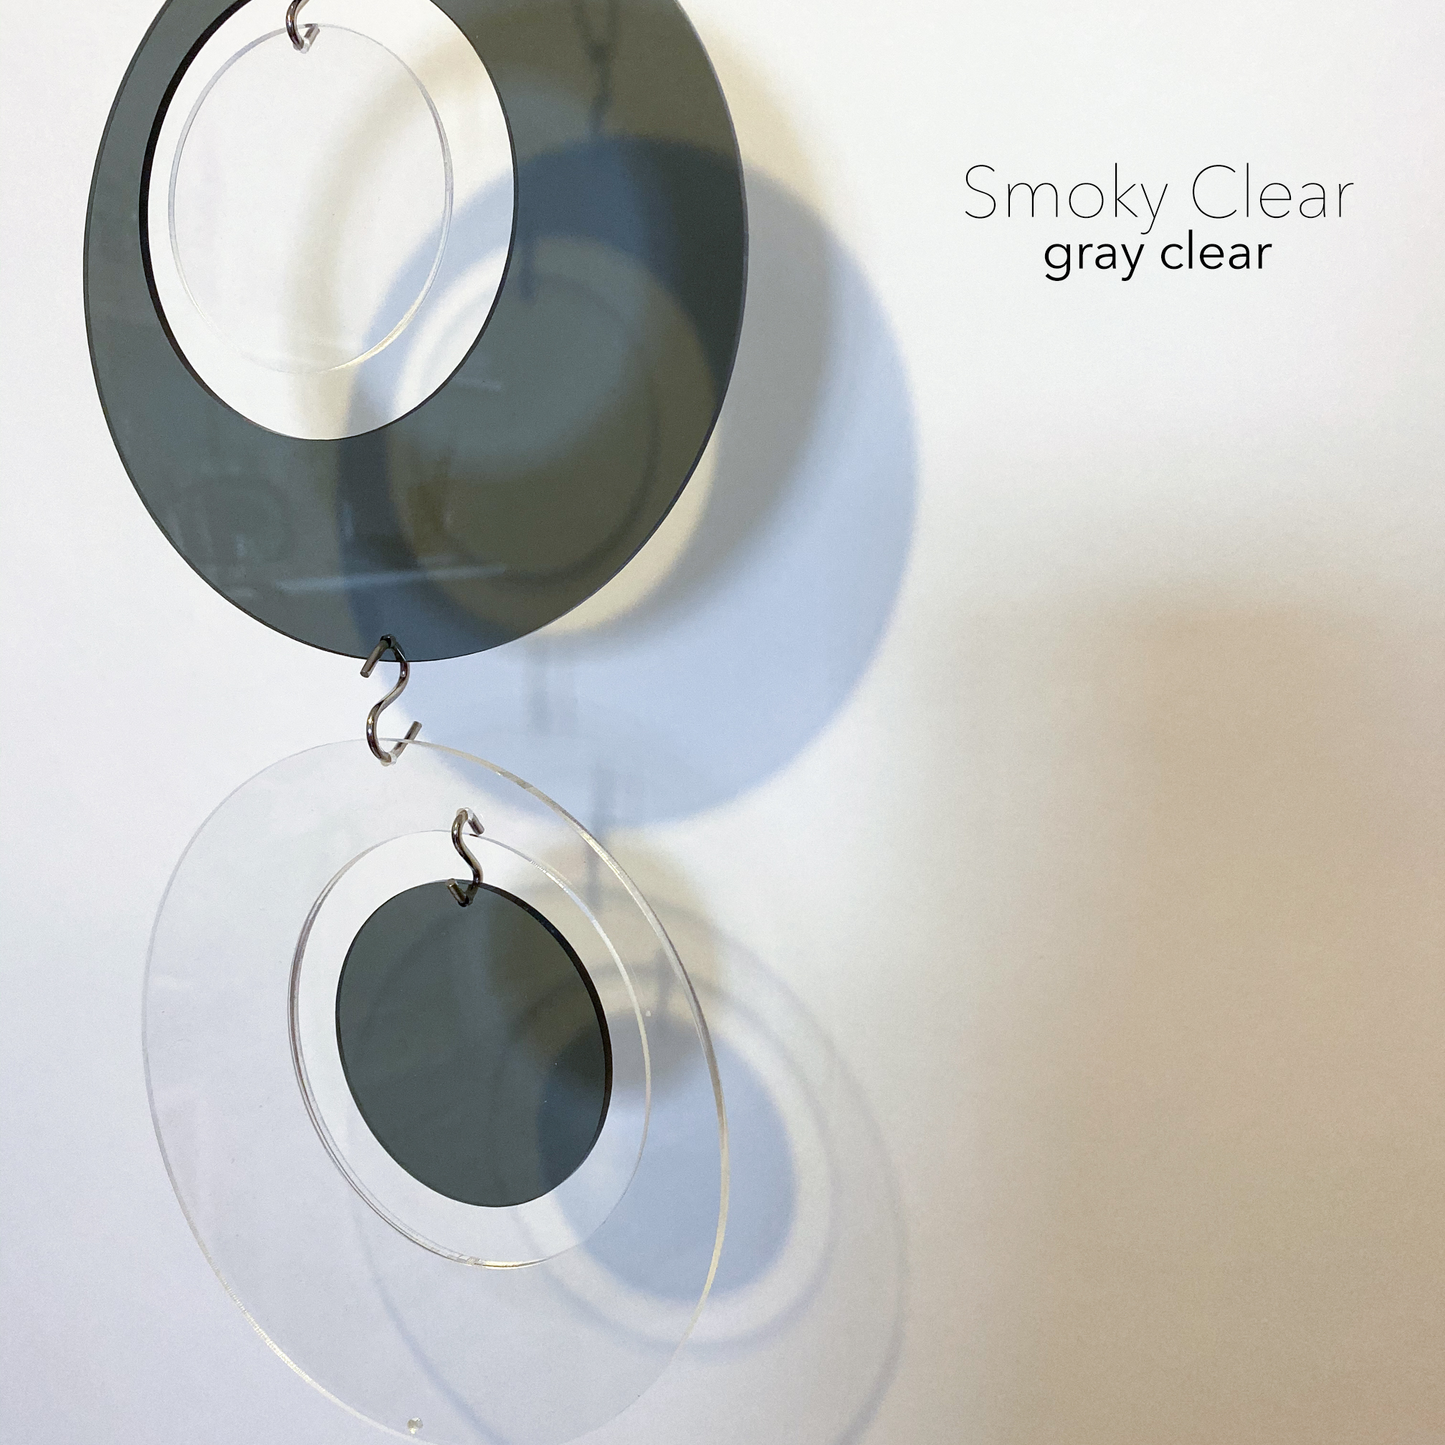 Groovy Smoky Gray Clear Acrylic DIY Kits - Smoky Gray and Clear colors - Room Divider, Partition, Wall Art, and Mobiles by AtomicMobiles.com